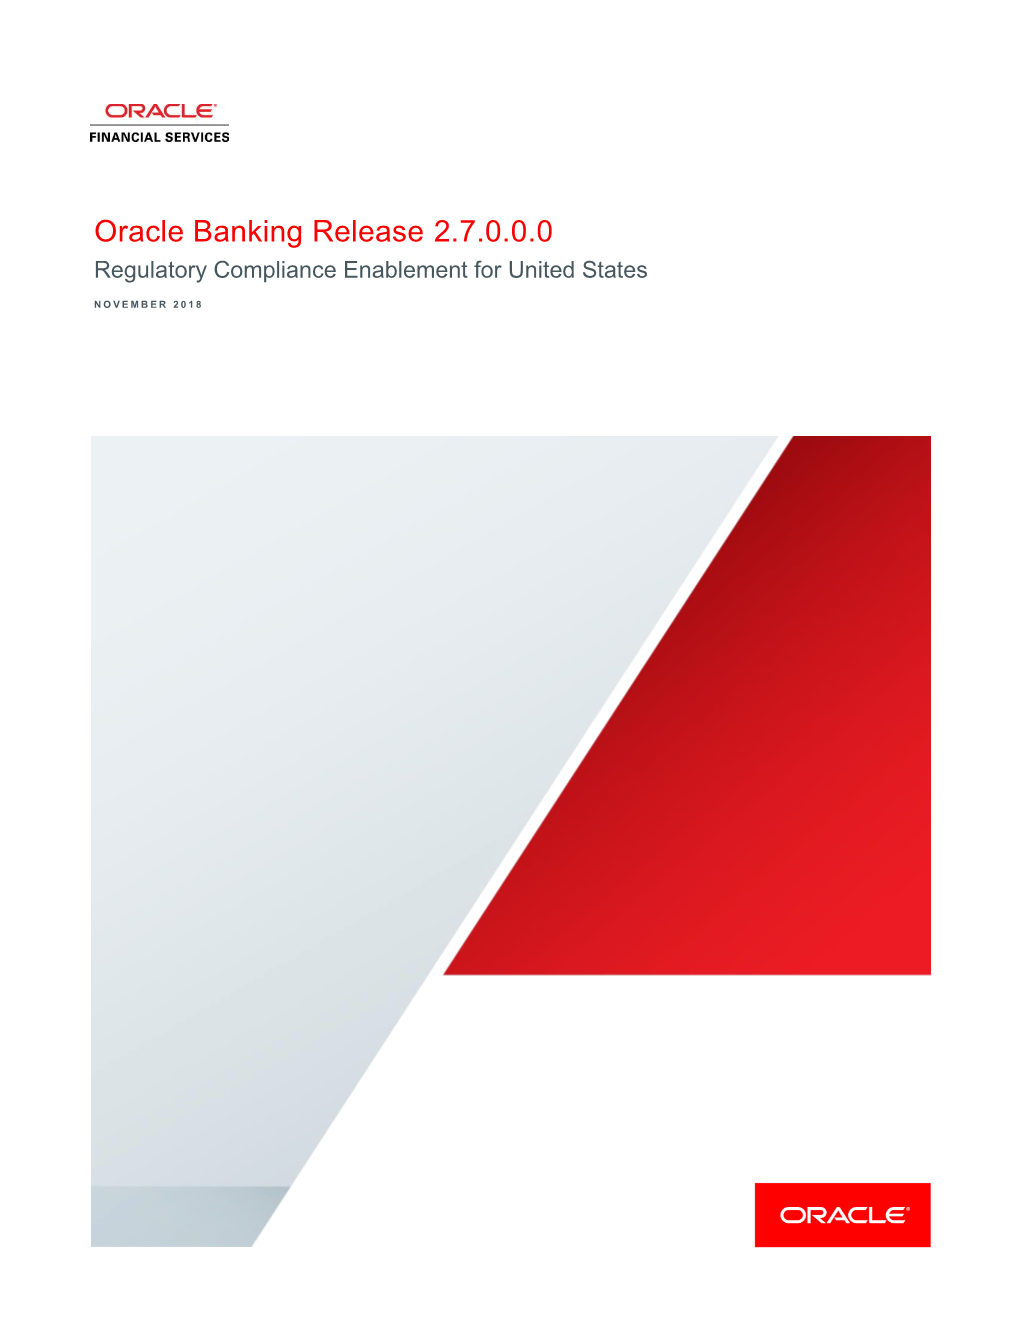 Oracle Banking: Compliance and Regulation in the United States